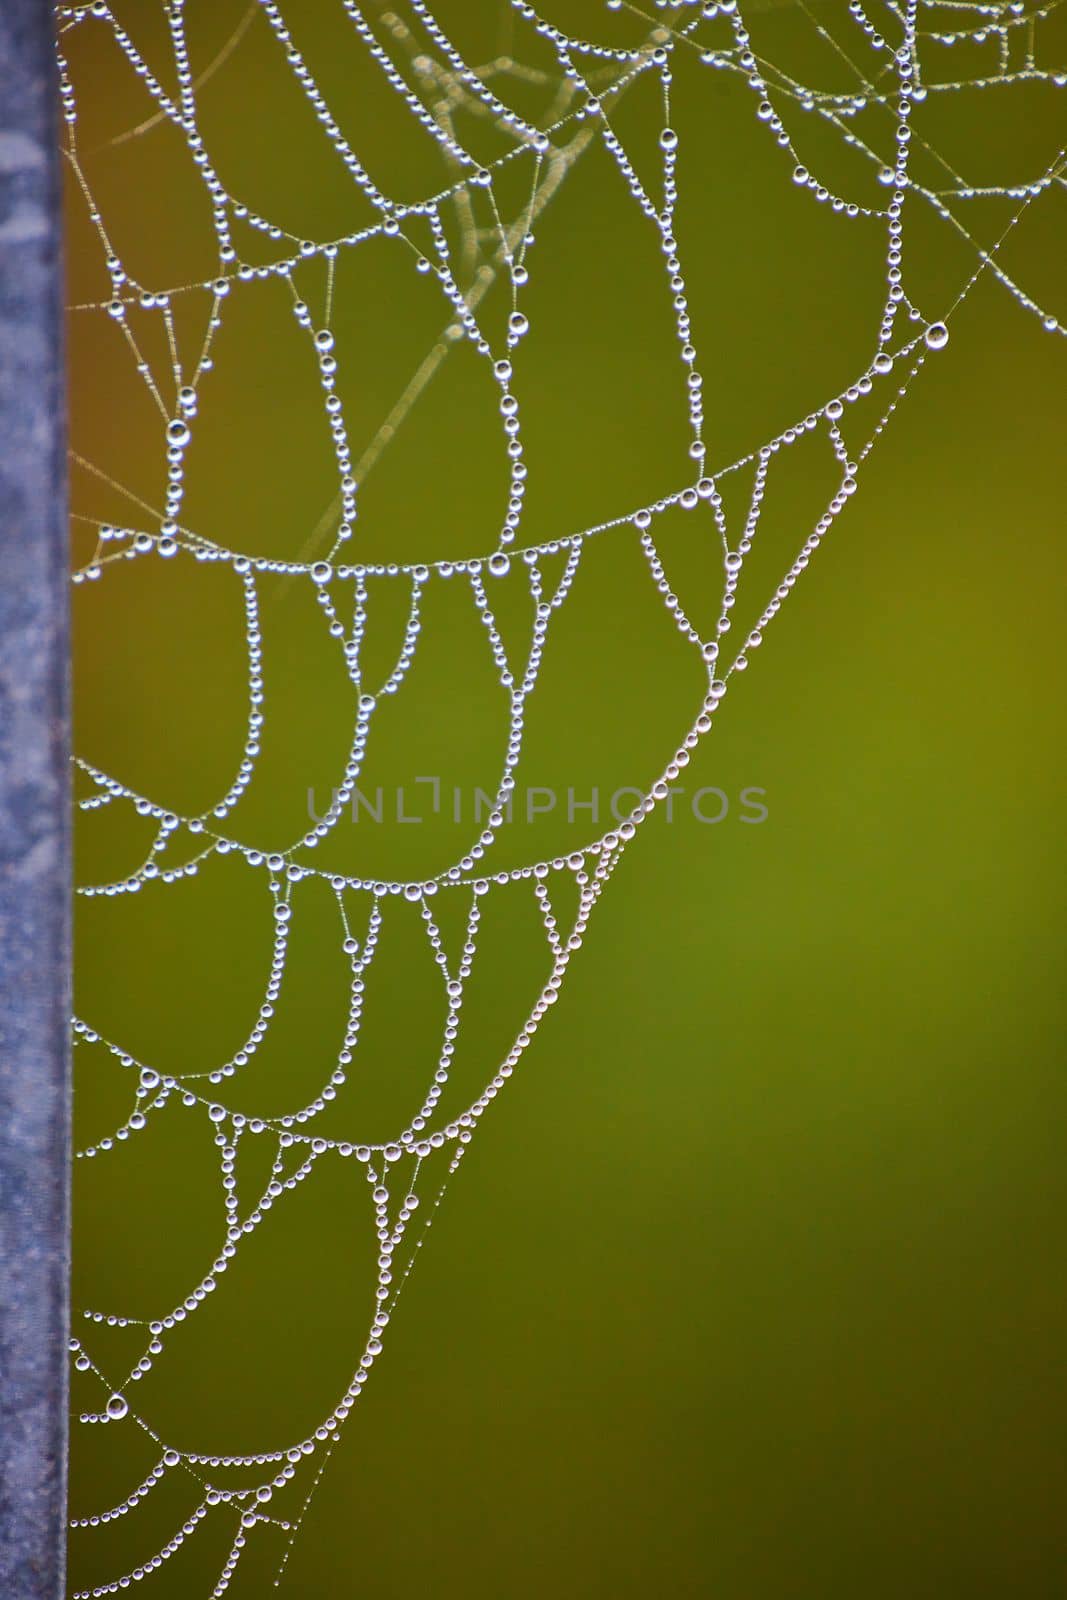 Image of Dew drops small covering entire spider web in detail against soft green background